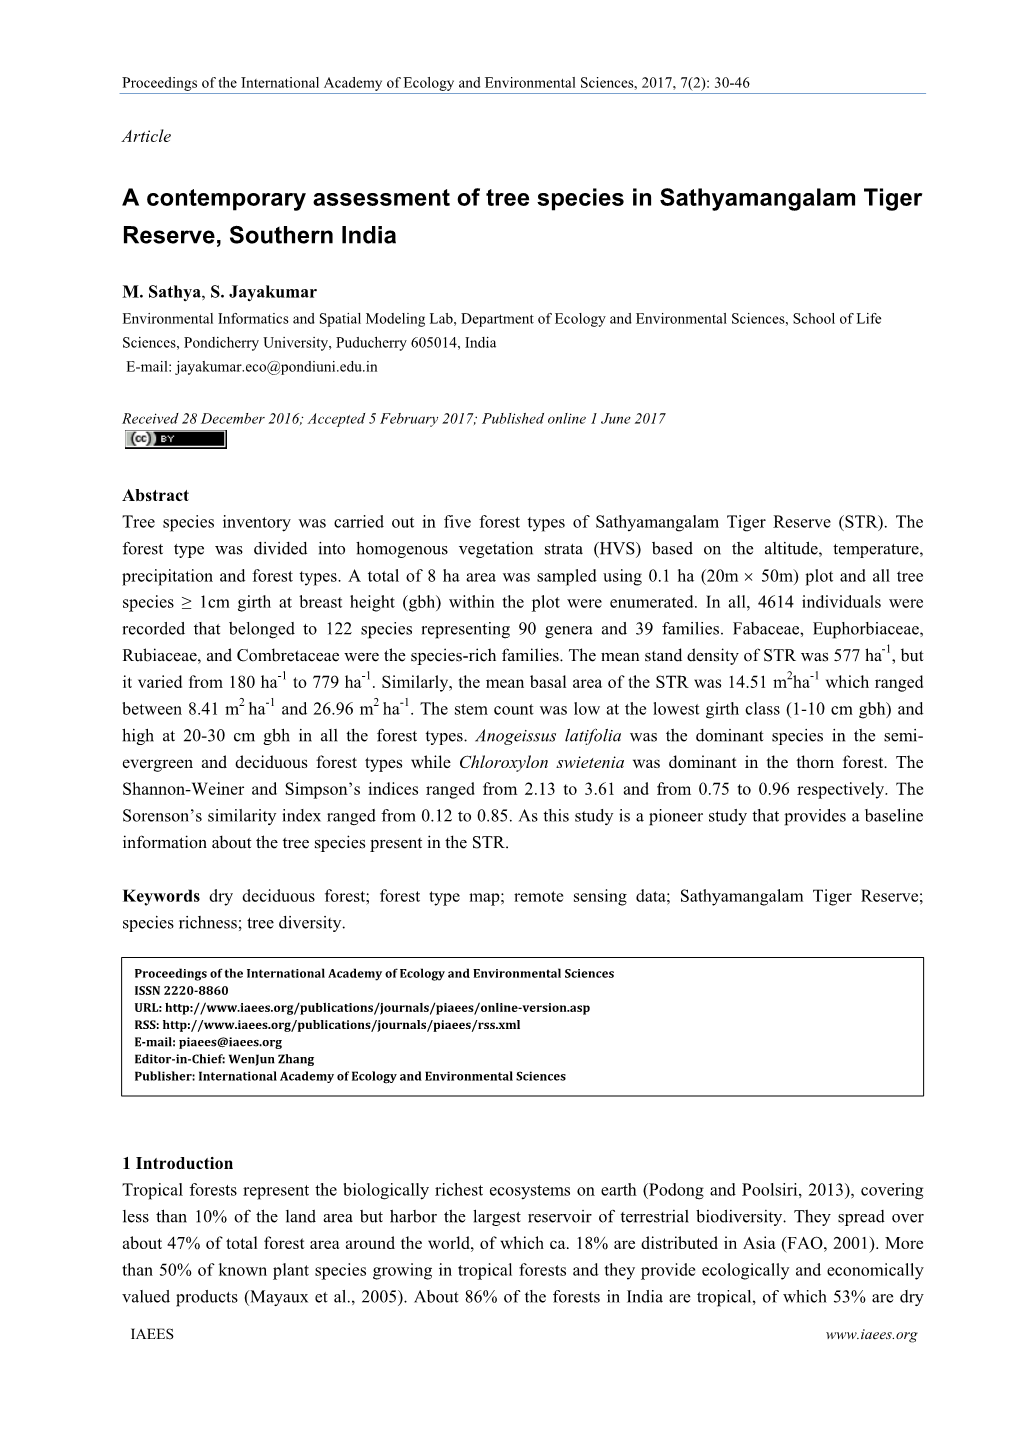 A Contemporary Assessment of Tree Species in Sathyamangalam Tiger Reserve, Southern India